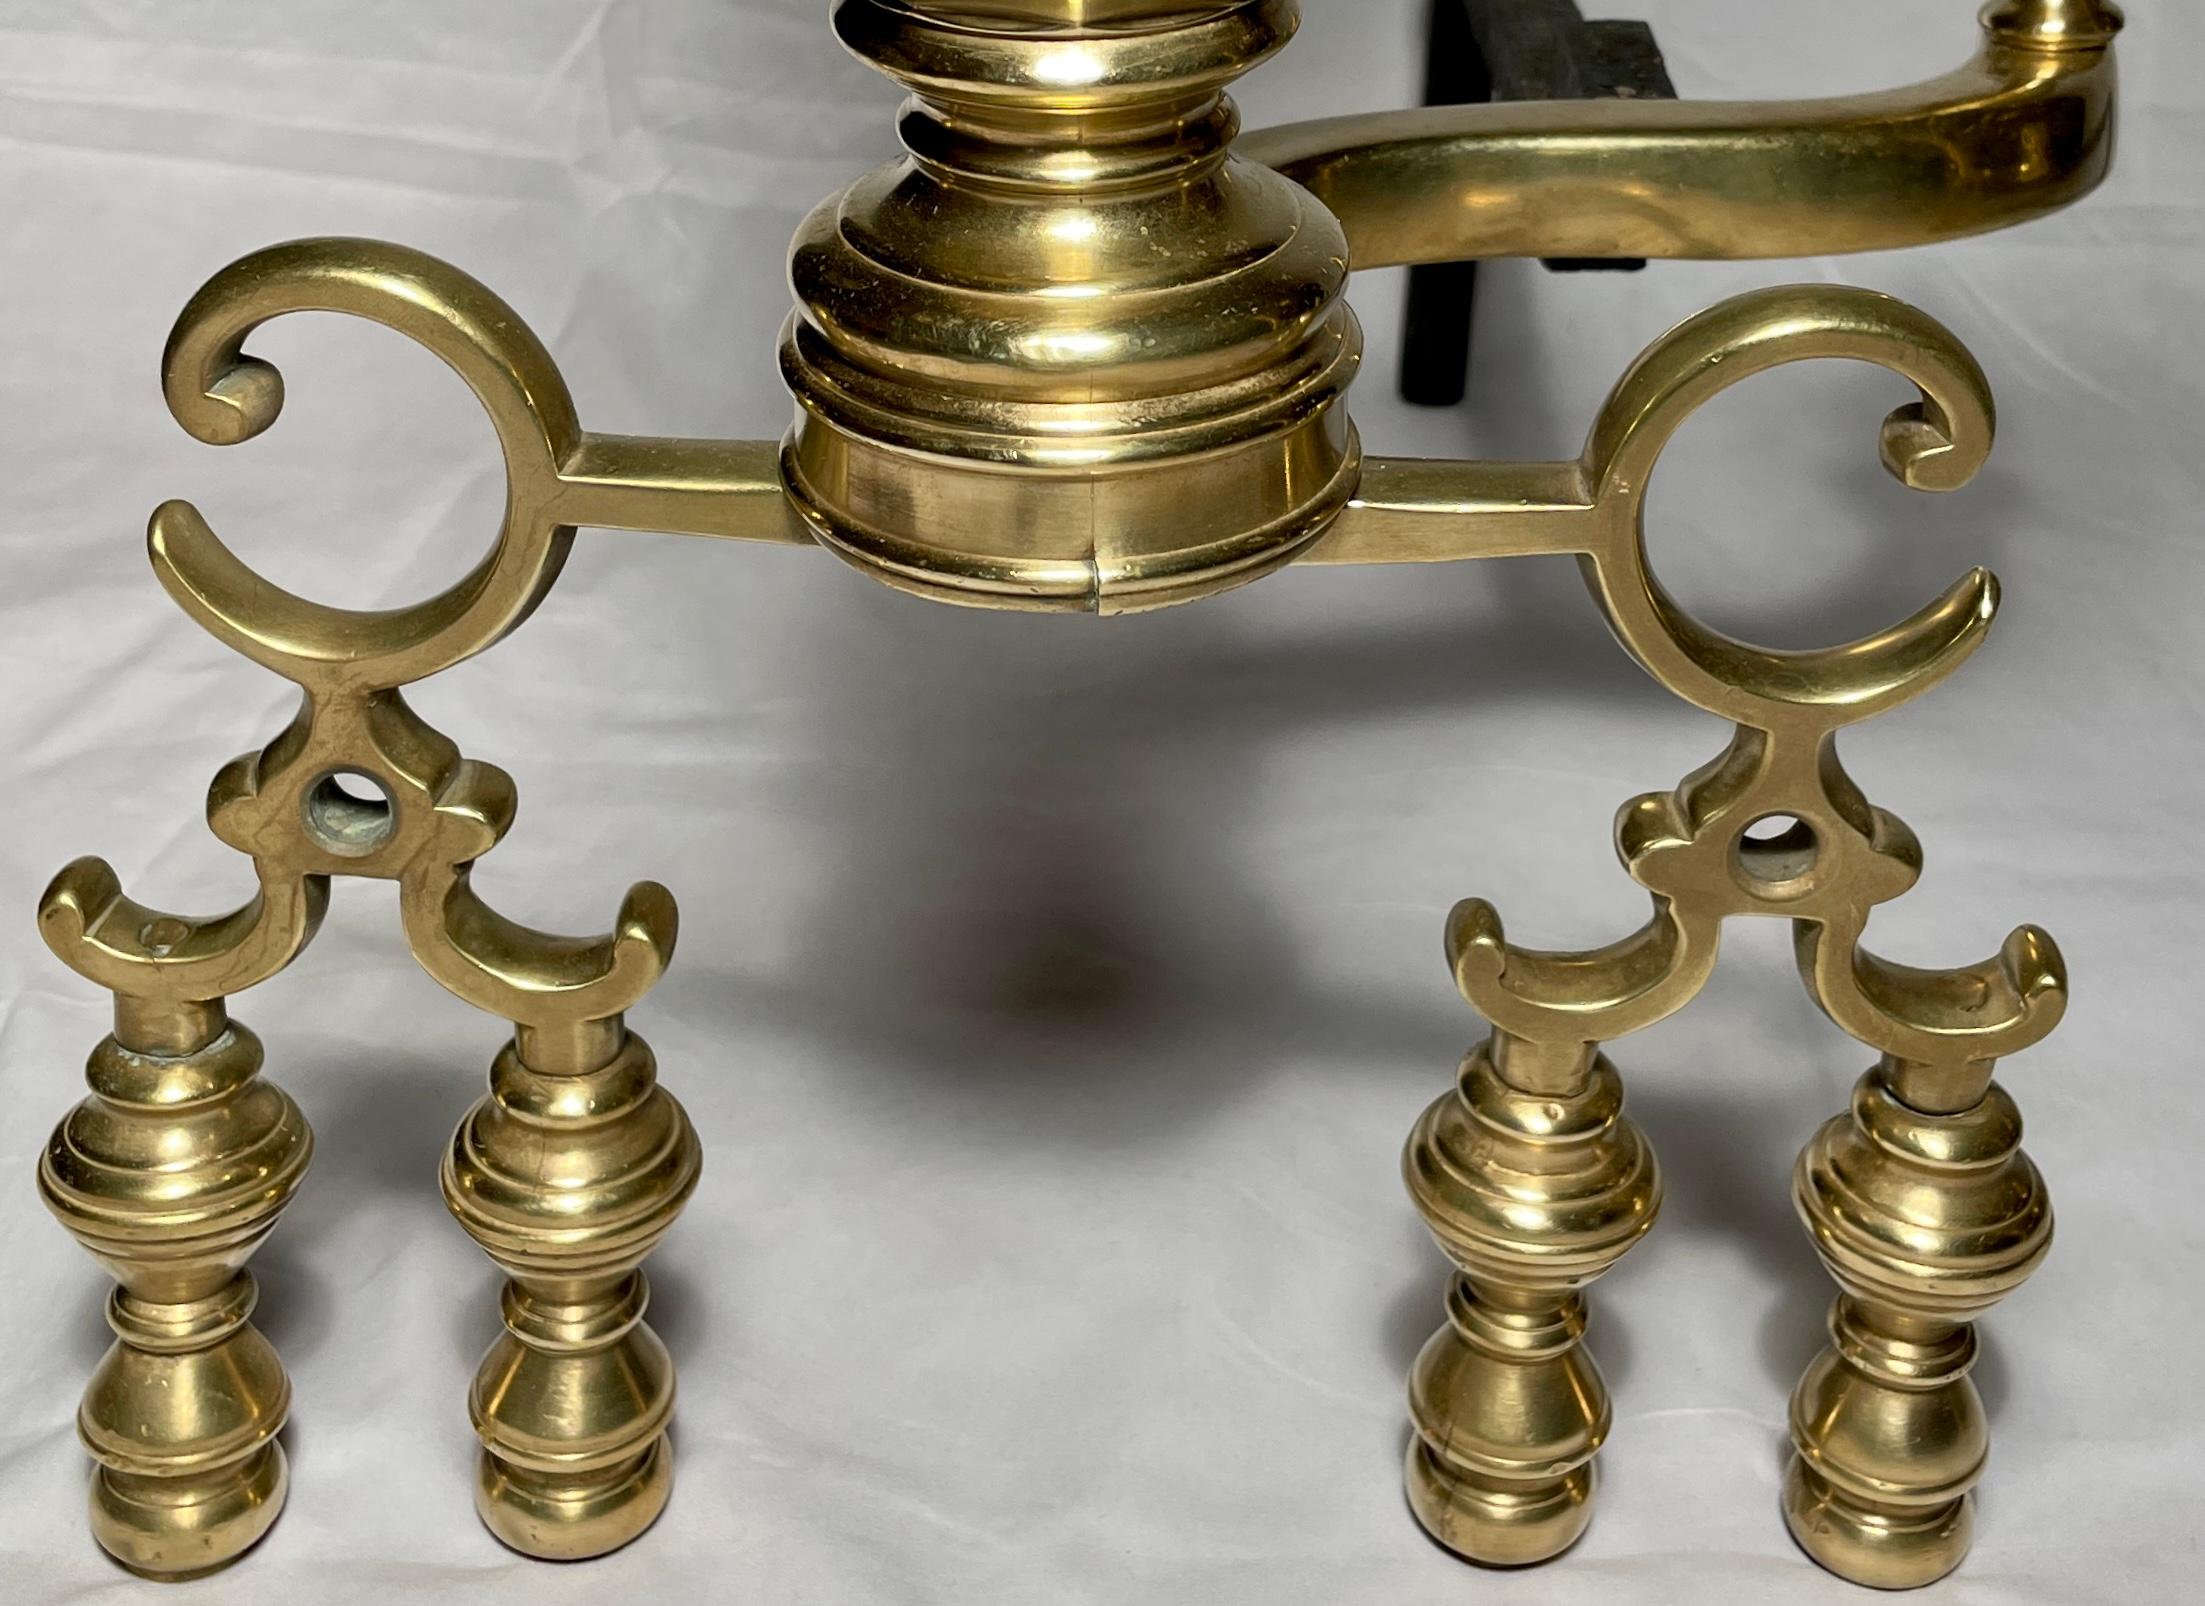 Antique English Polished Brass Fireplace Andirons, circa 1860 For Sale 1